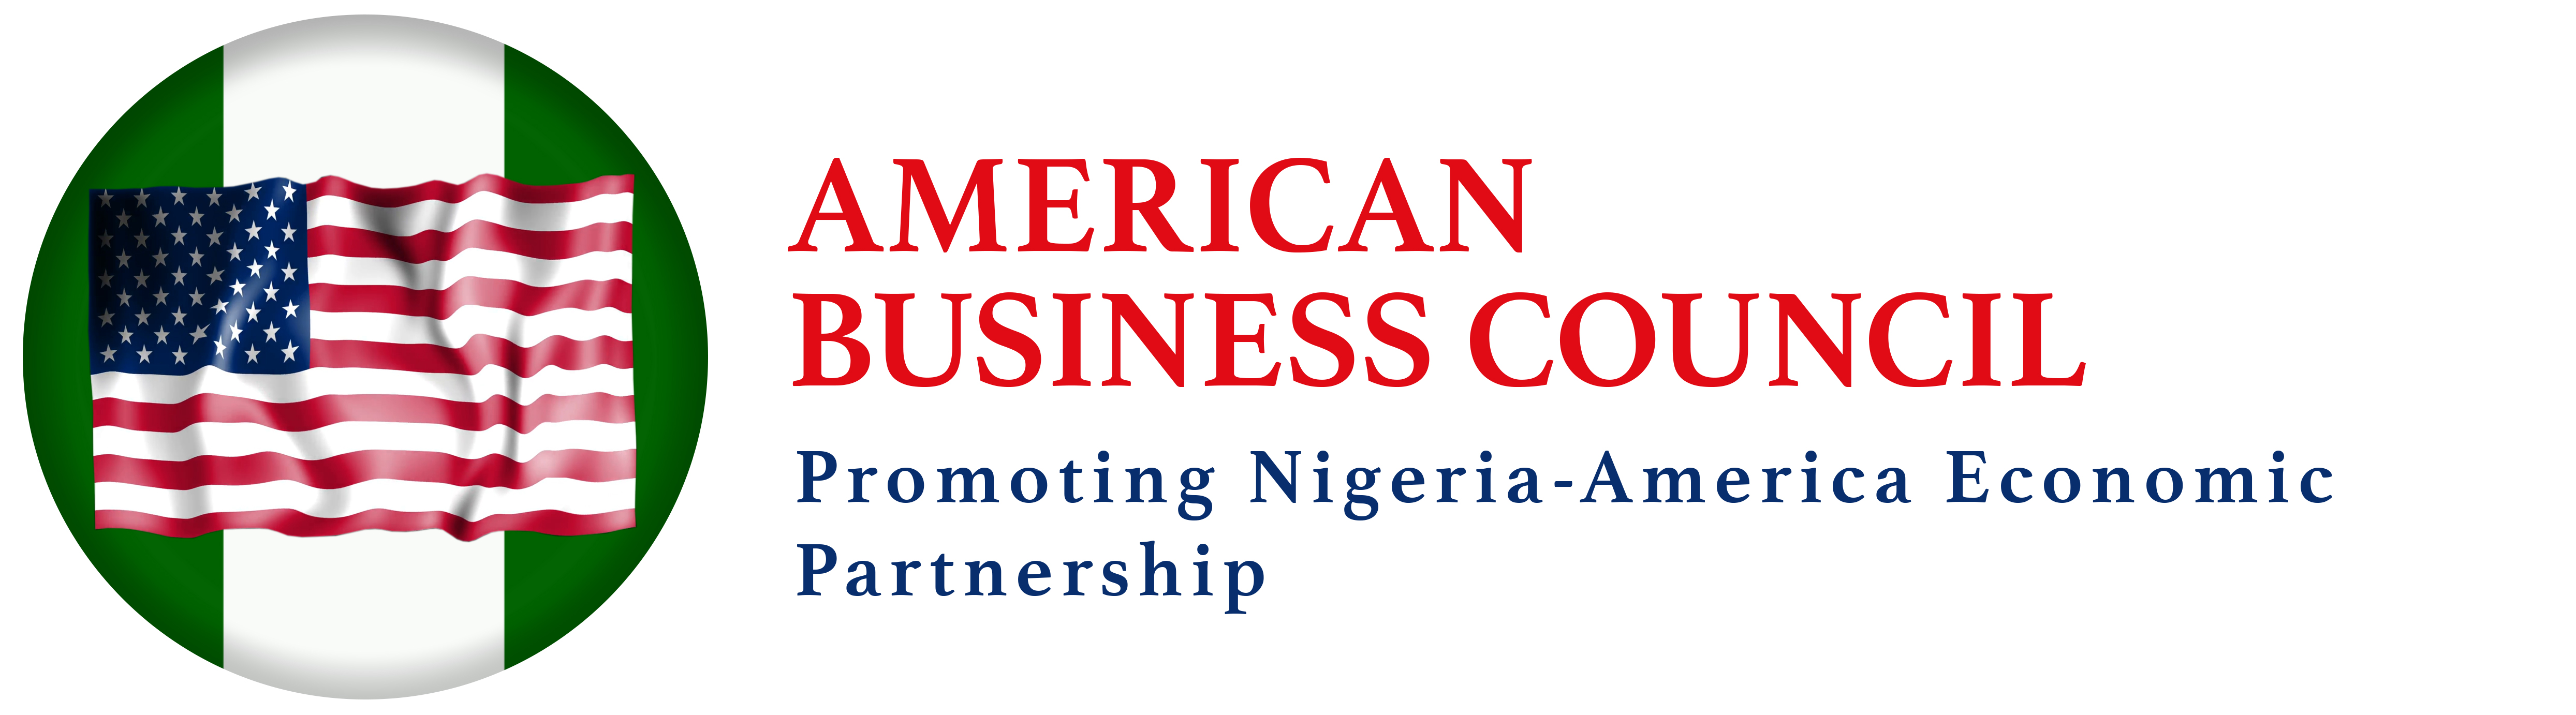 The American Business Council.